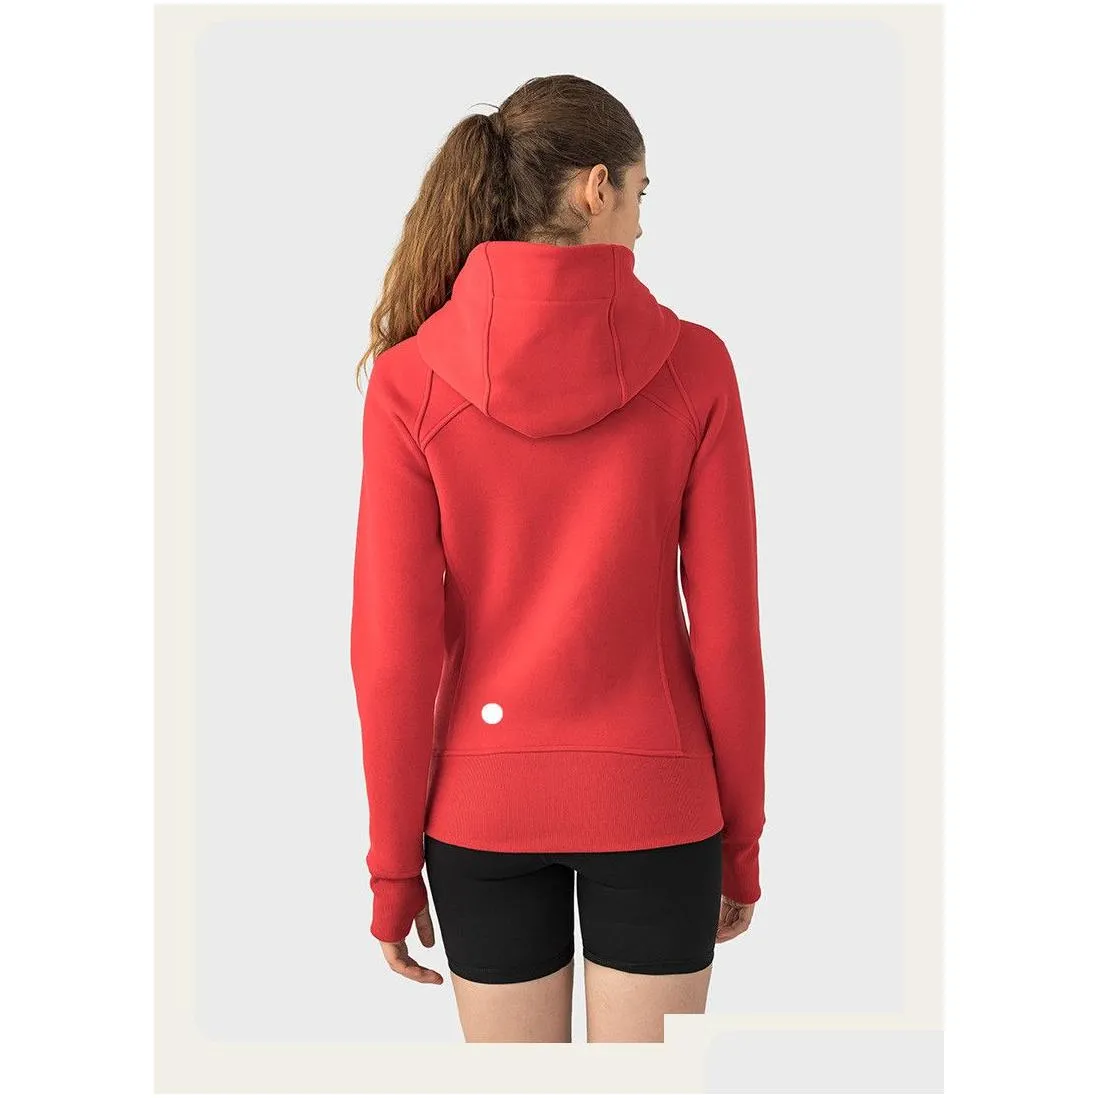 LL-DJ028 Brand Womens Exercise Fitness Wear Yoga Outfit Hoodies Sportswear Outer Jackets Outdoor Apparel Casual Adult Running Long Sleeve